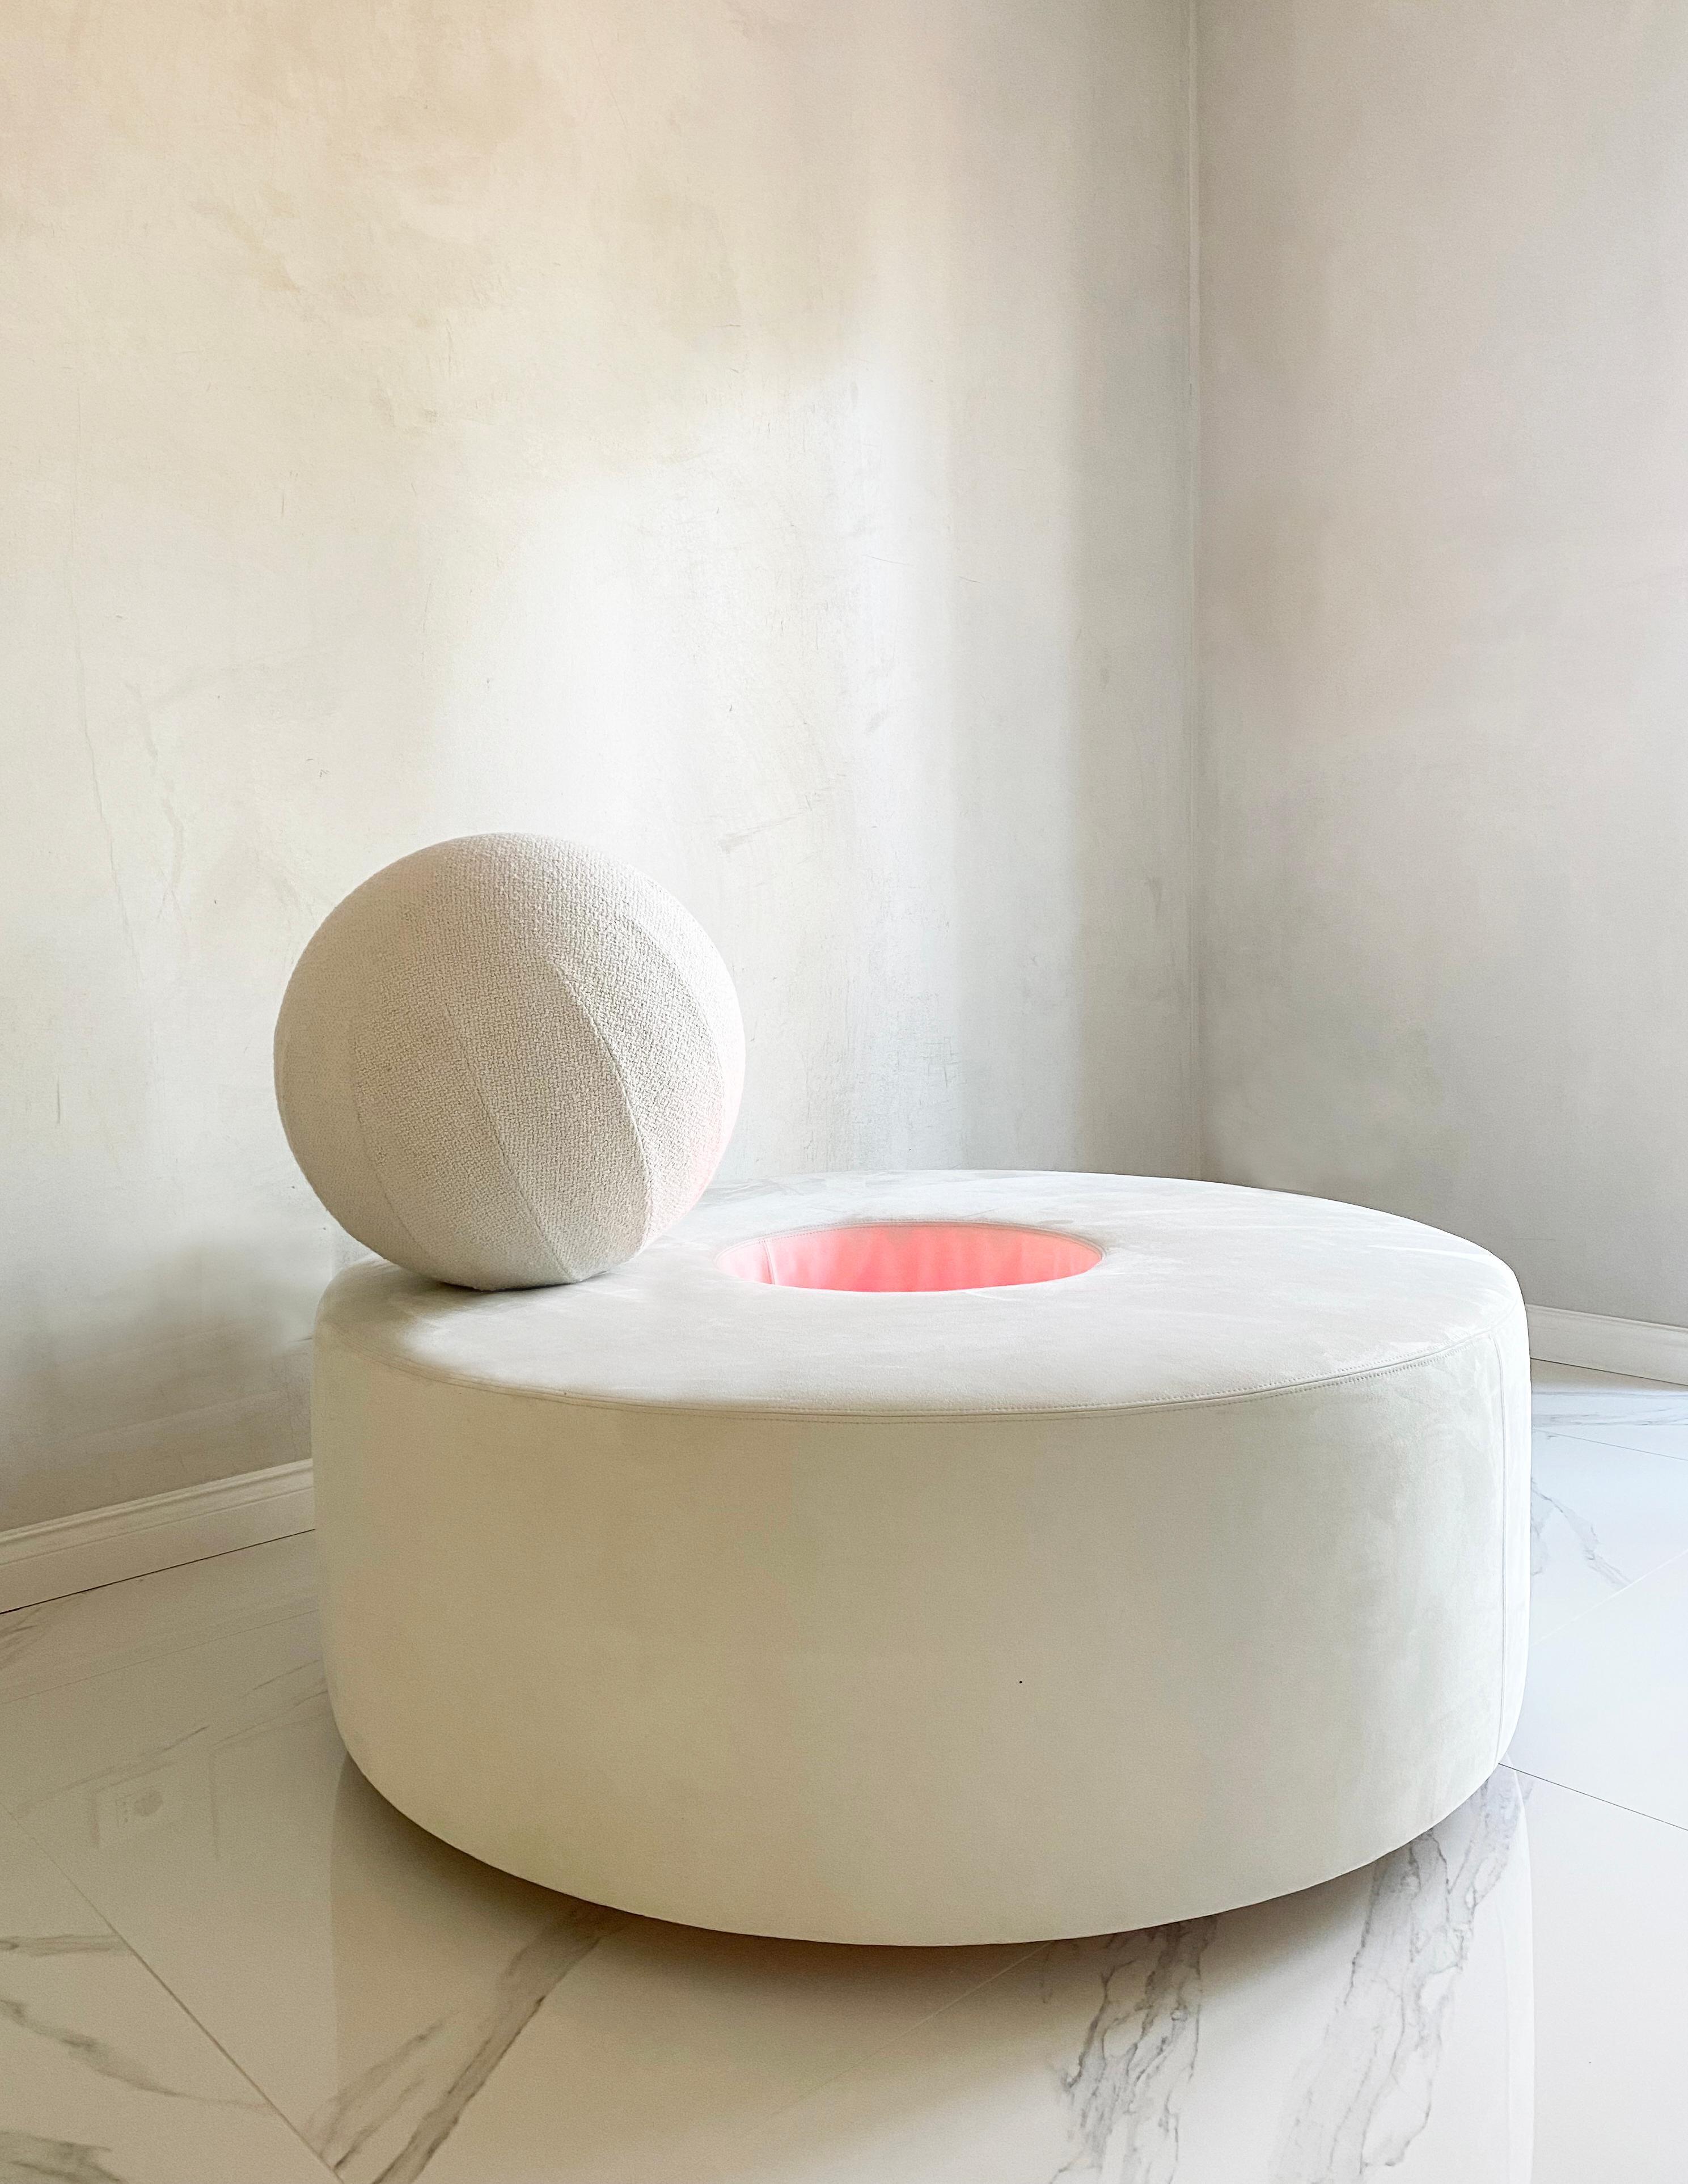 Saturno Pouf by Stefania Loschi
Dimensions: D x W x H cm
Materials: 
Also available: customizable sofa cover upon request.

SATURNO is an indoor and outdoor lounge sitting solution. The sphere is the seat backrest and also a seat itself. Design